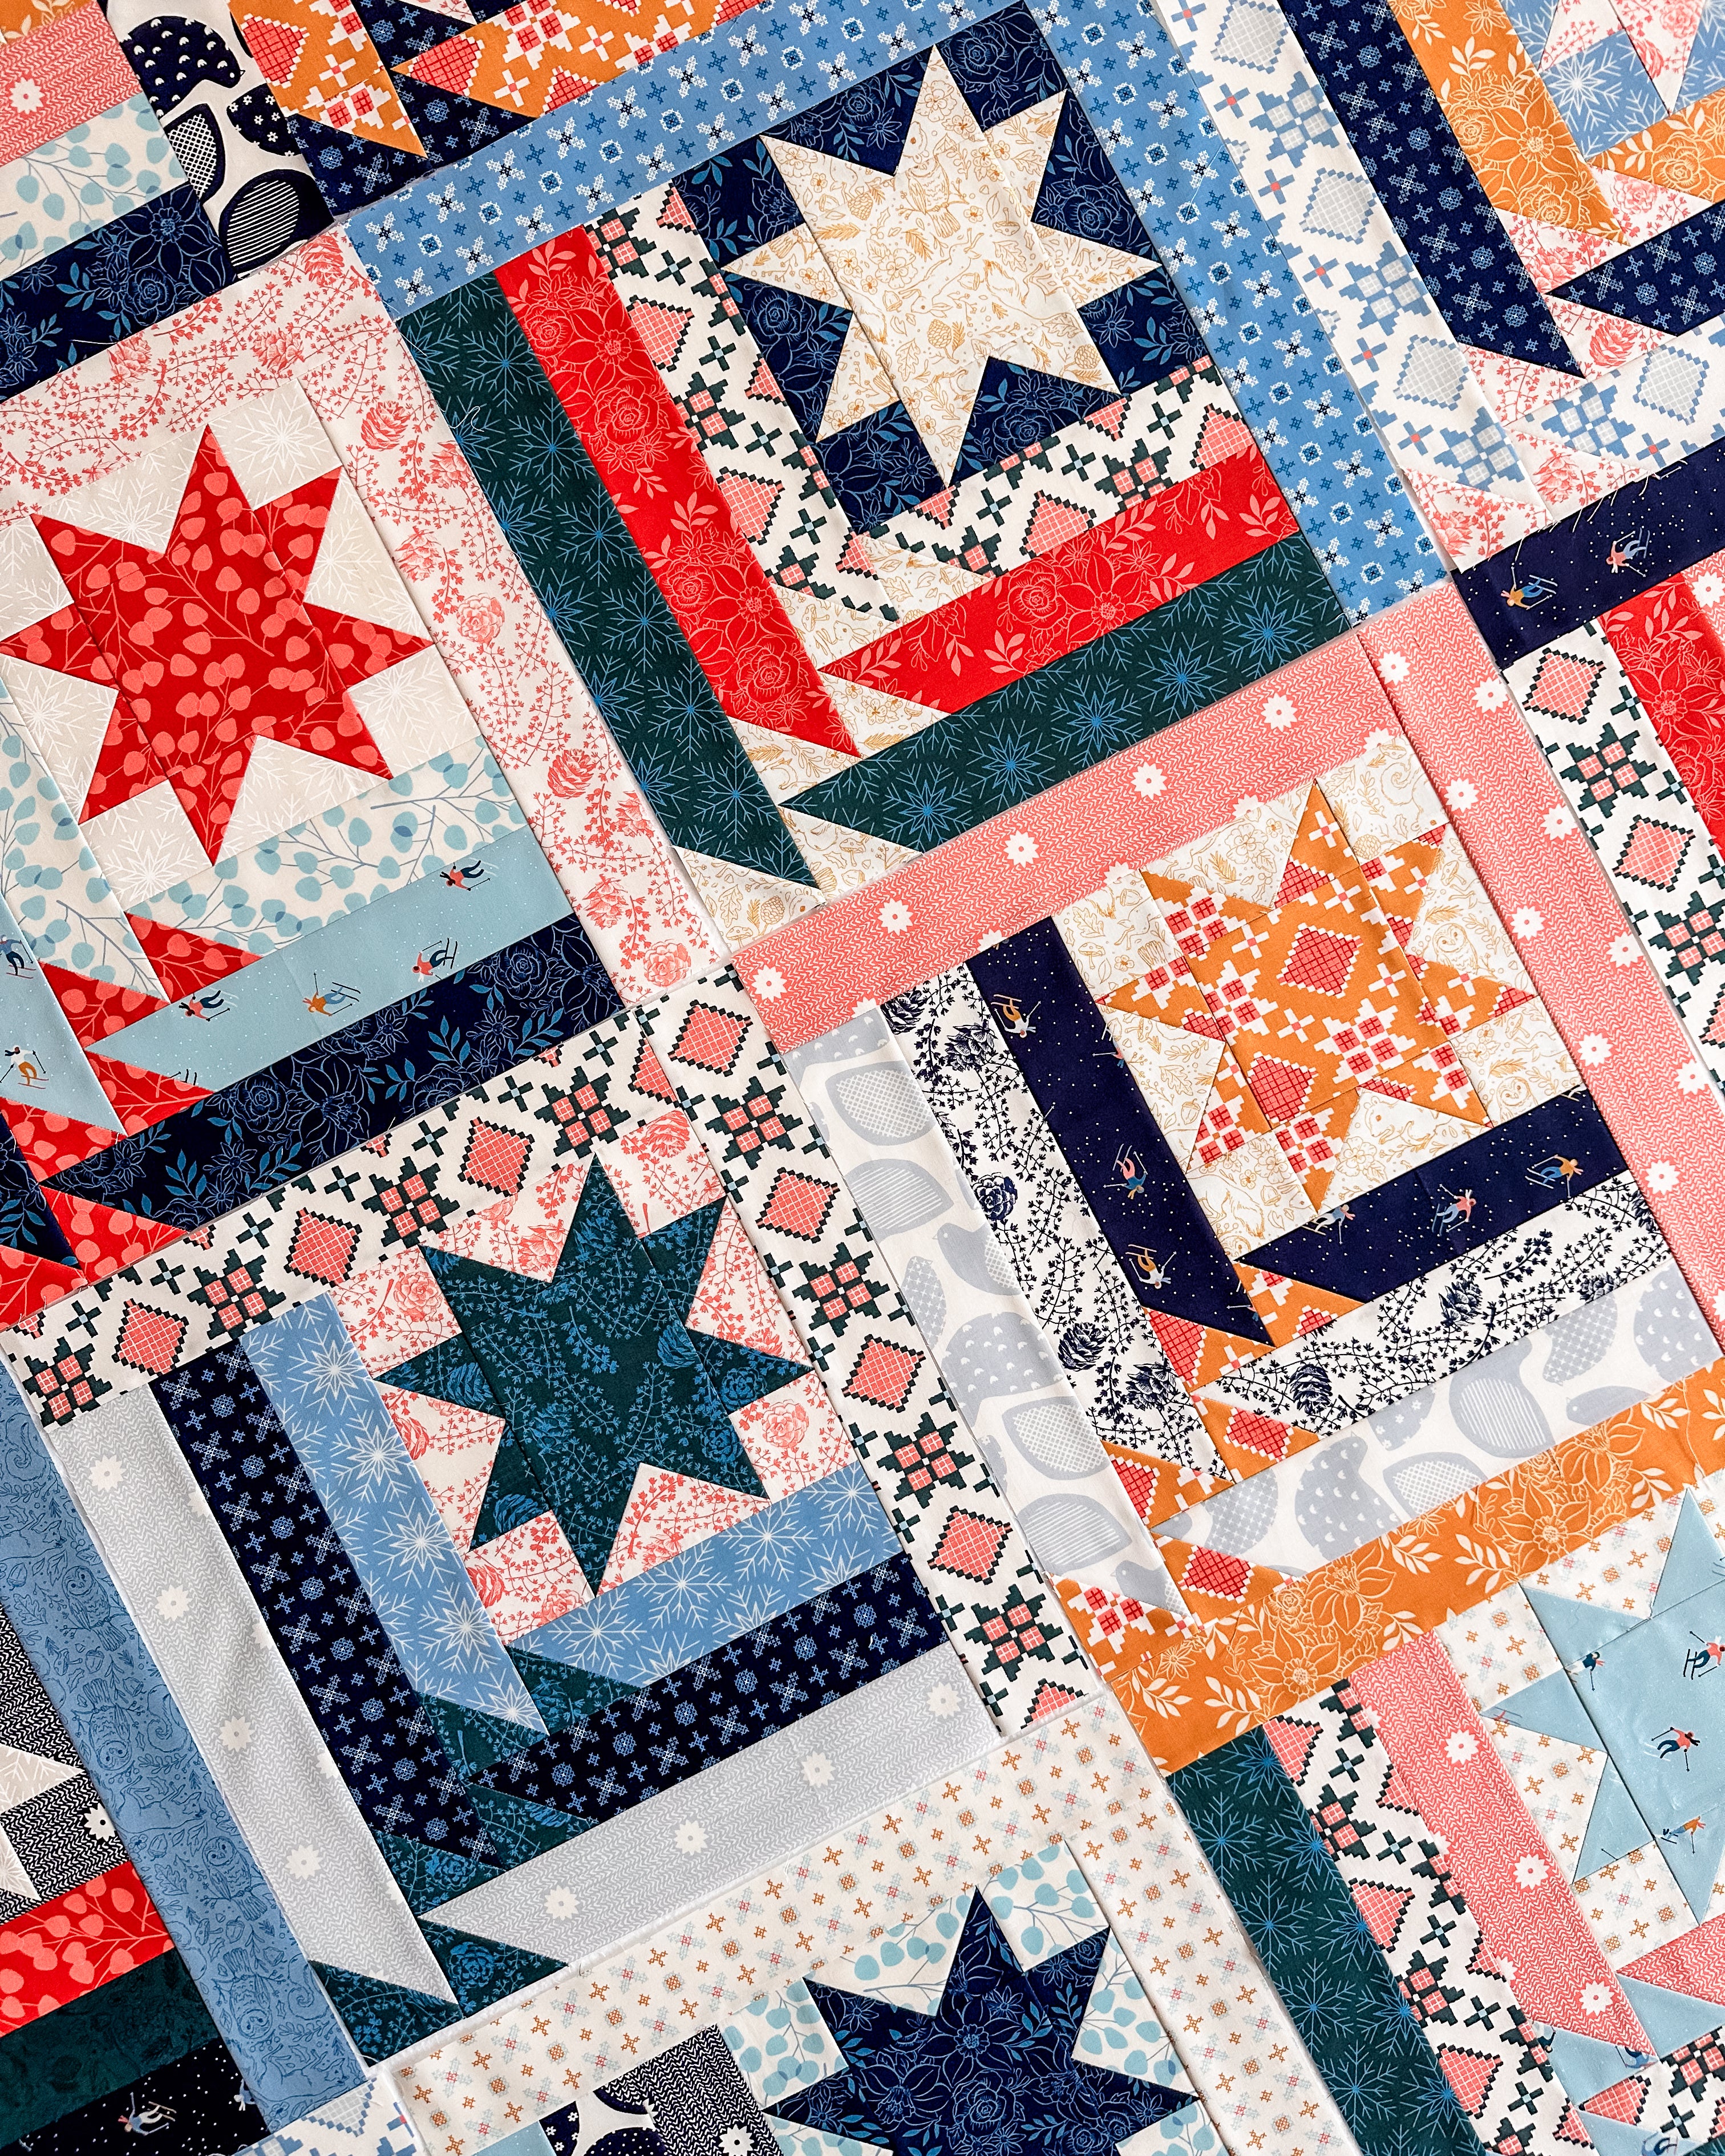 a scrappy version of the Mountain Valley quilt pattern made with Ruby Star Society Winterglow fat quarters